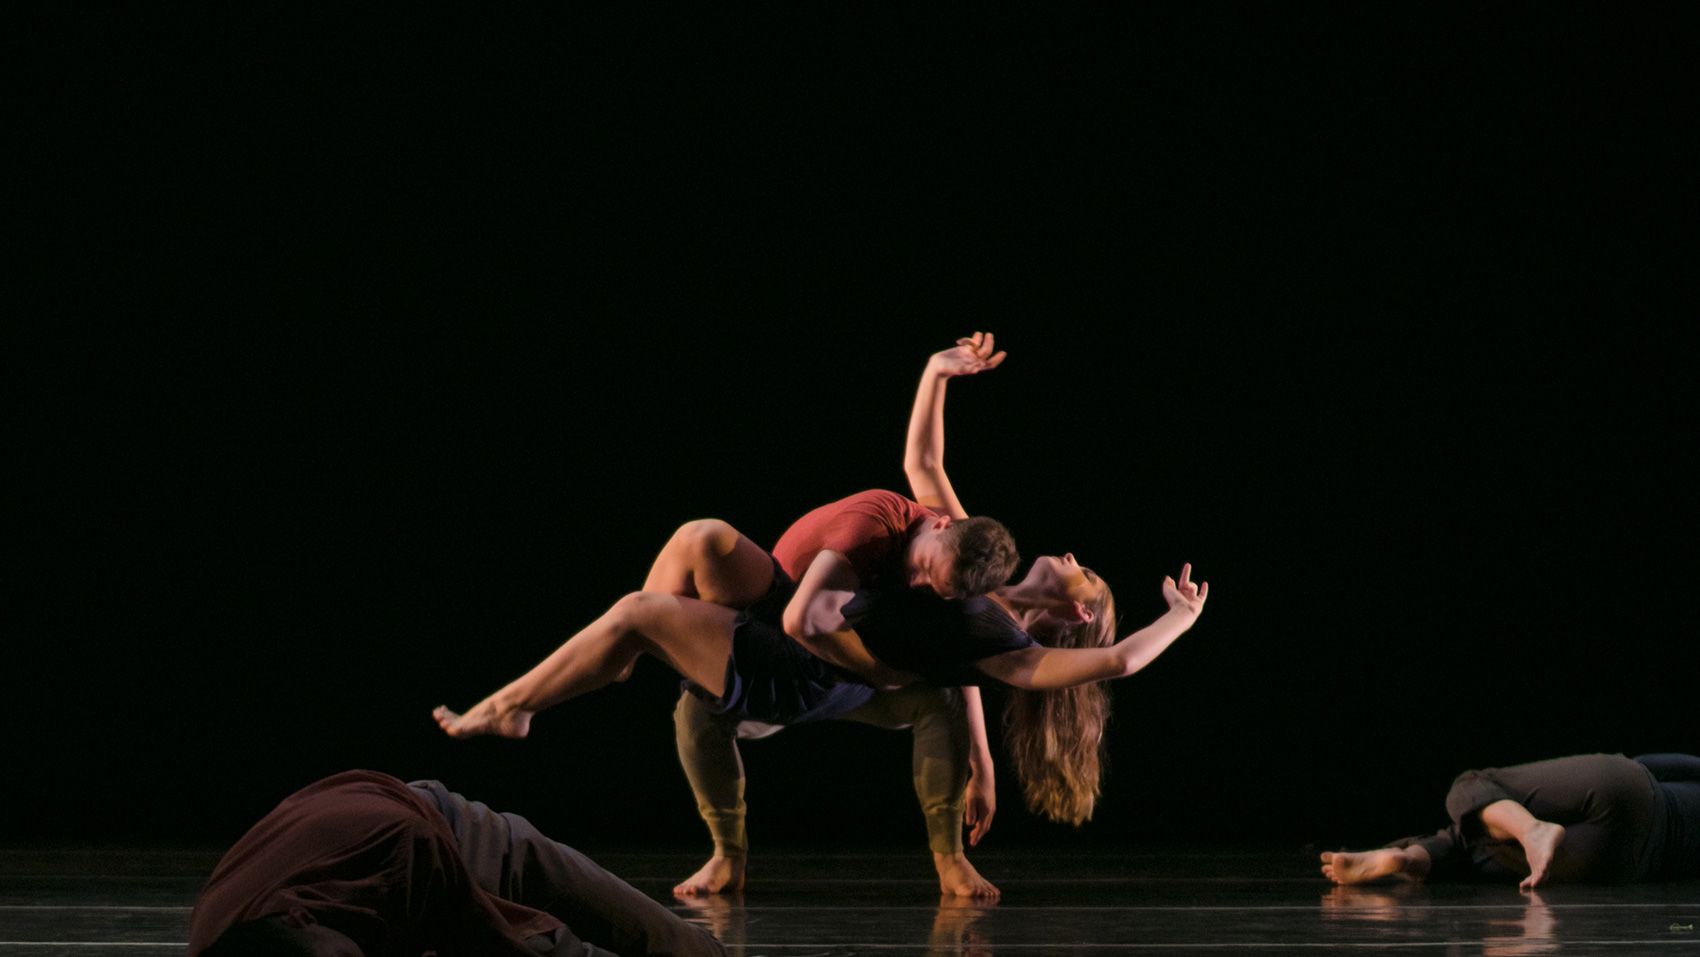 A male dancer crouches his body as he embraces and holds a female dancer with one arm, his other arm trailing to his side. The female dancer lays in his embrace, her body parallel to the ground. She moves her arms gracefully through the air.